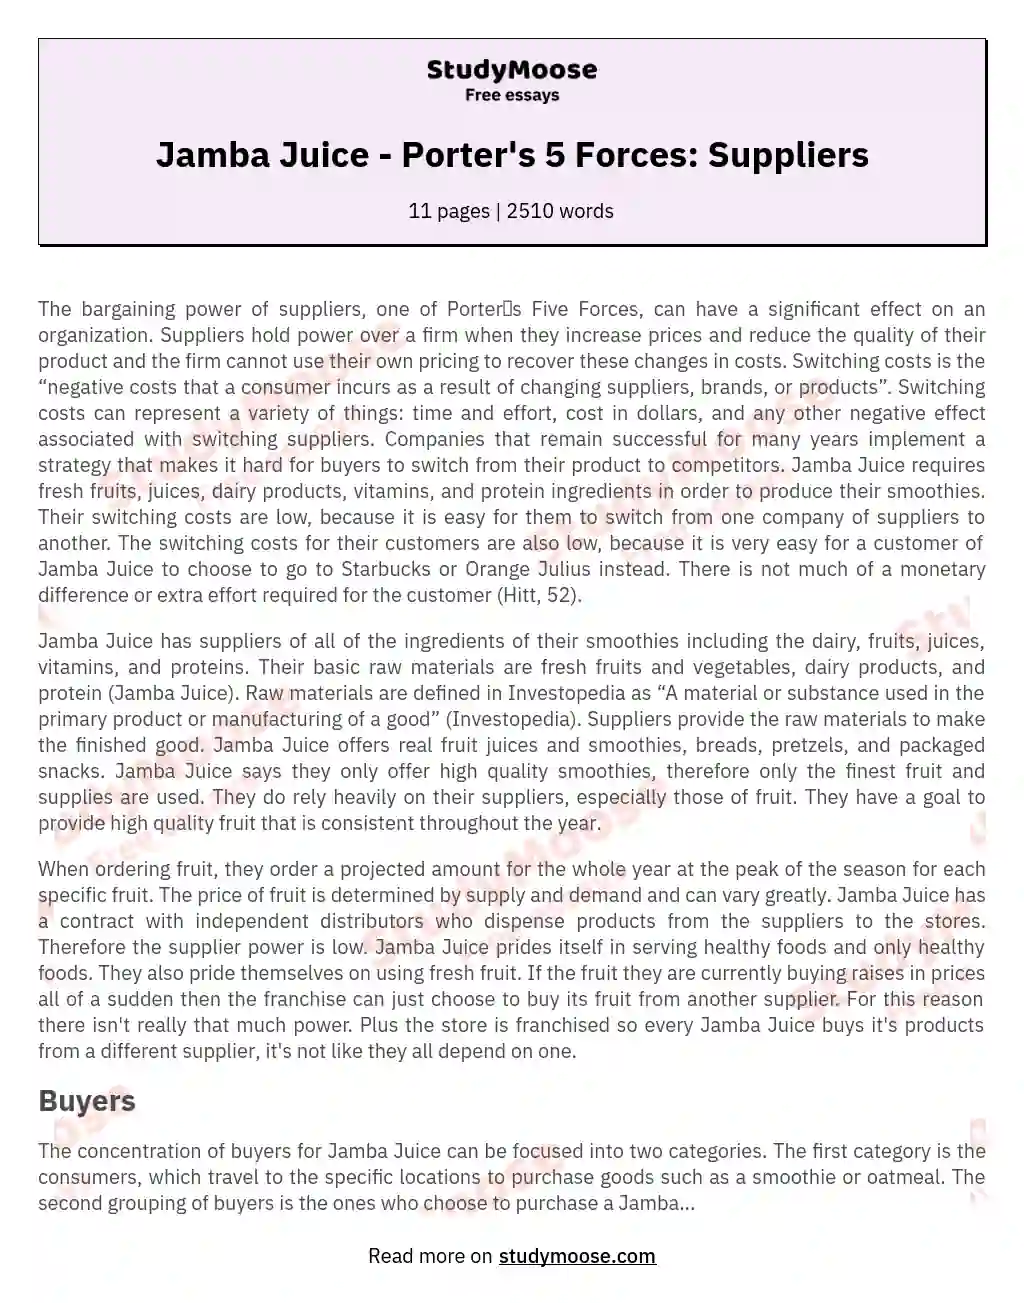 Jamba Juice - Porter's 5 Forces: Suppliers essay